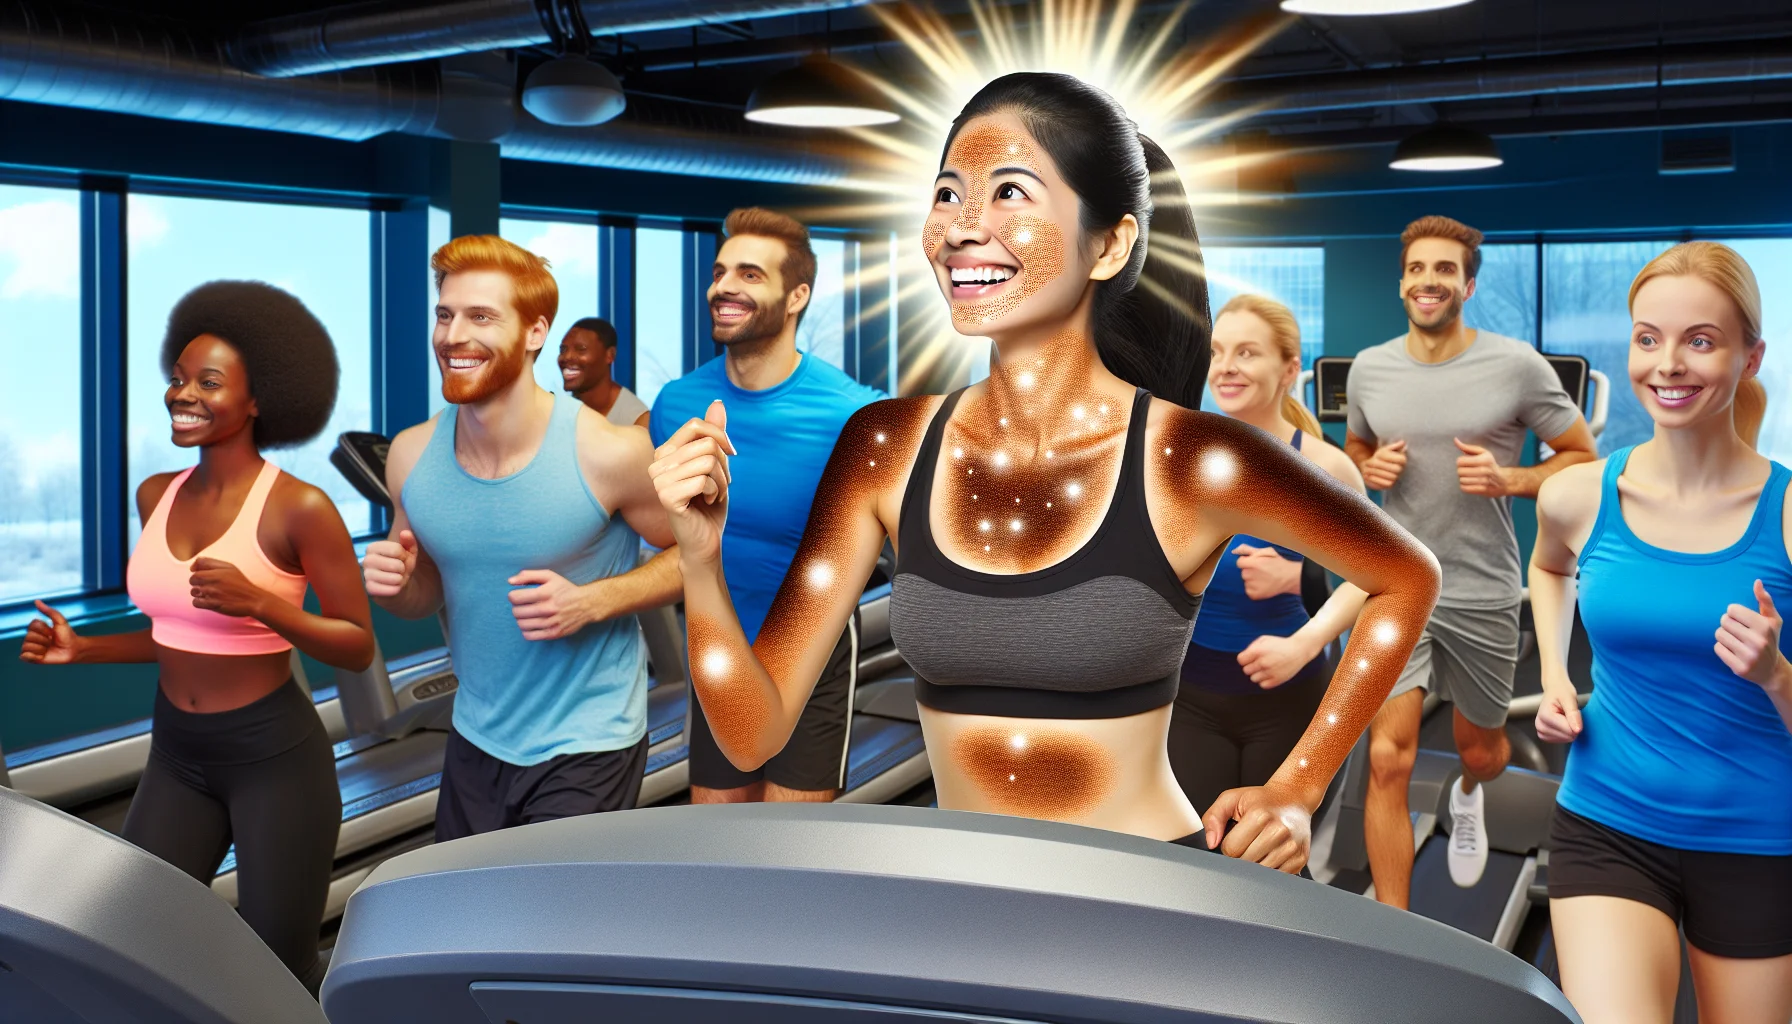 A humorous, lighthearted situation where exercise results in a radiant glow and the reduction of dark spots. Set in a well-equipped fitness center filled with a diverse group of people of all body shapes, ages, and descents including Caucasian, Hispanic, Black, Middle-Eastern, South Asian, and White. They are engaging in various exercises, from strength training to cardio workouts. At the heart of the image, a cheerful South Asian woman is jogging on a treadmill, her skin dramatically glowing. Dark spots on her face appear to be magically vanishing, creating a halo of radiant light around her that is attractive and motivating others to continue their workout.